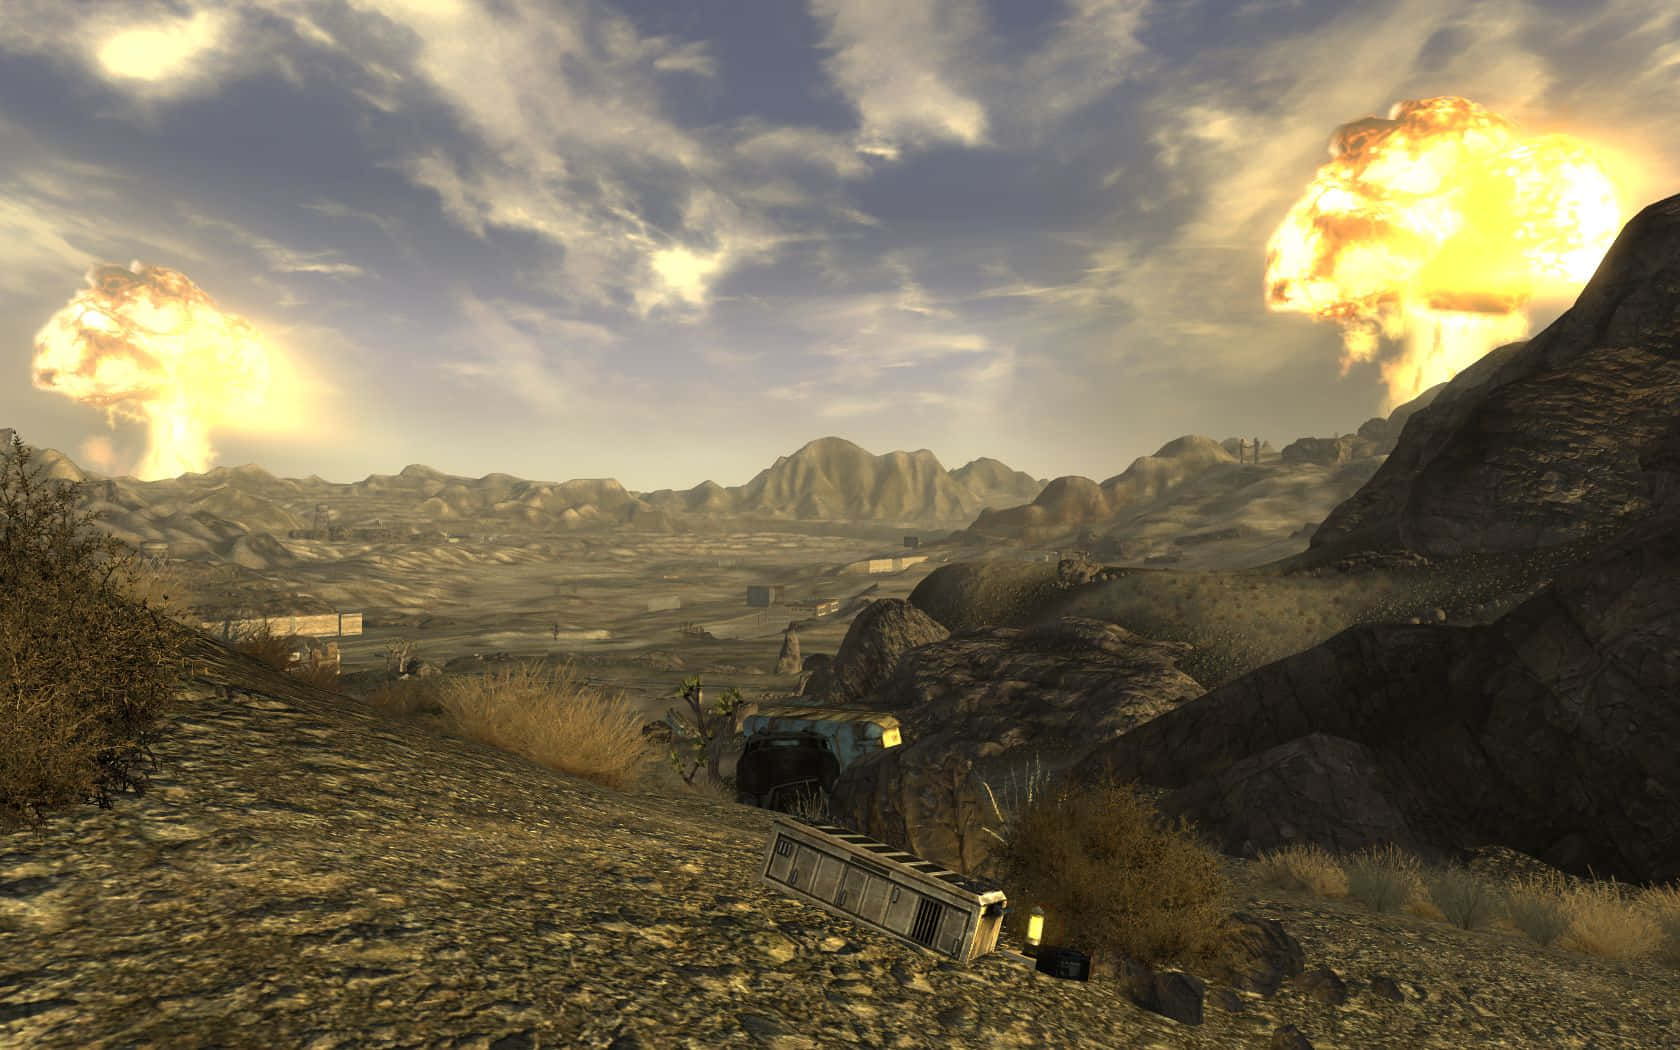 Apocalyptic Scene with Fallout Nuke Explosion Wallpaper